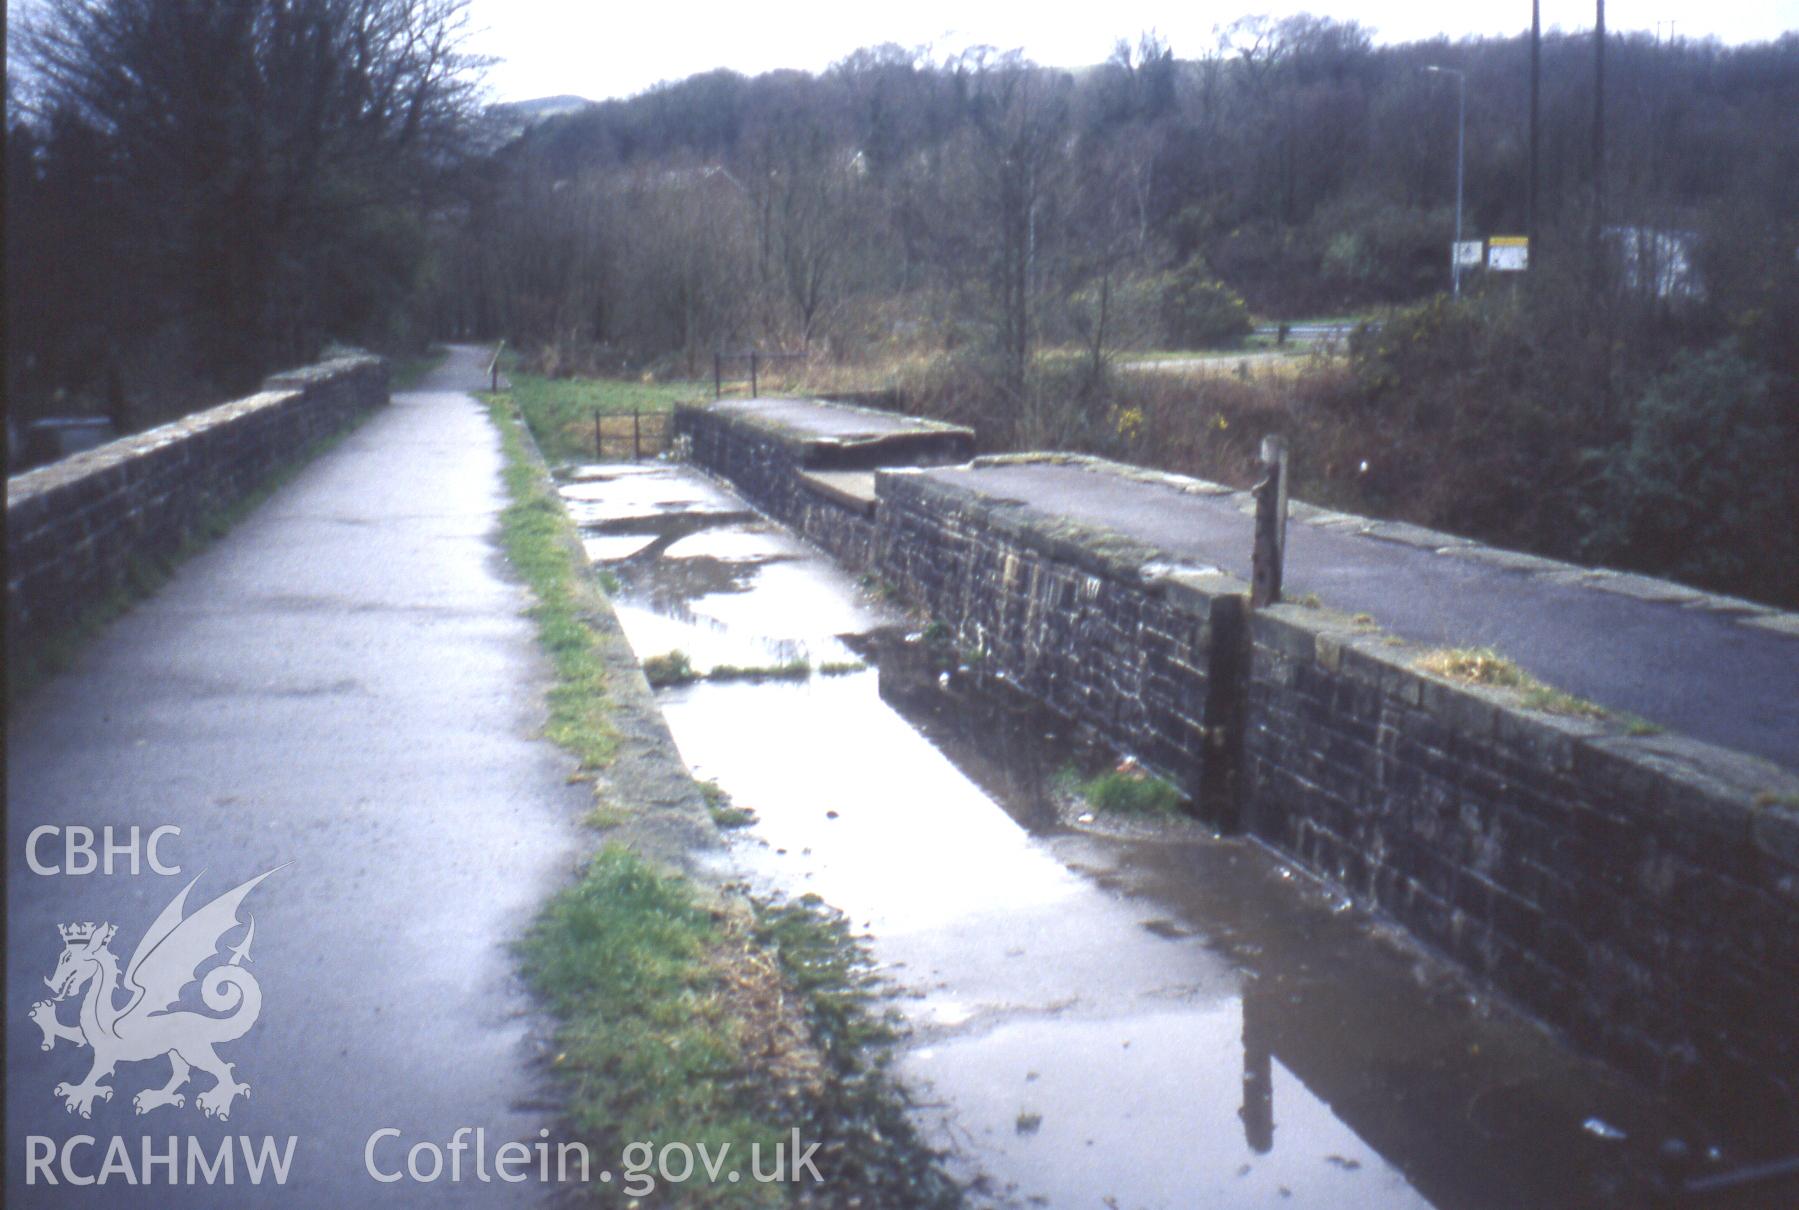 Aqueduct trough from the NE showing the outlet & overflow.